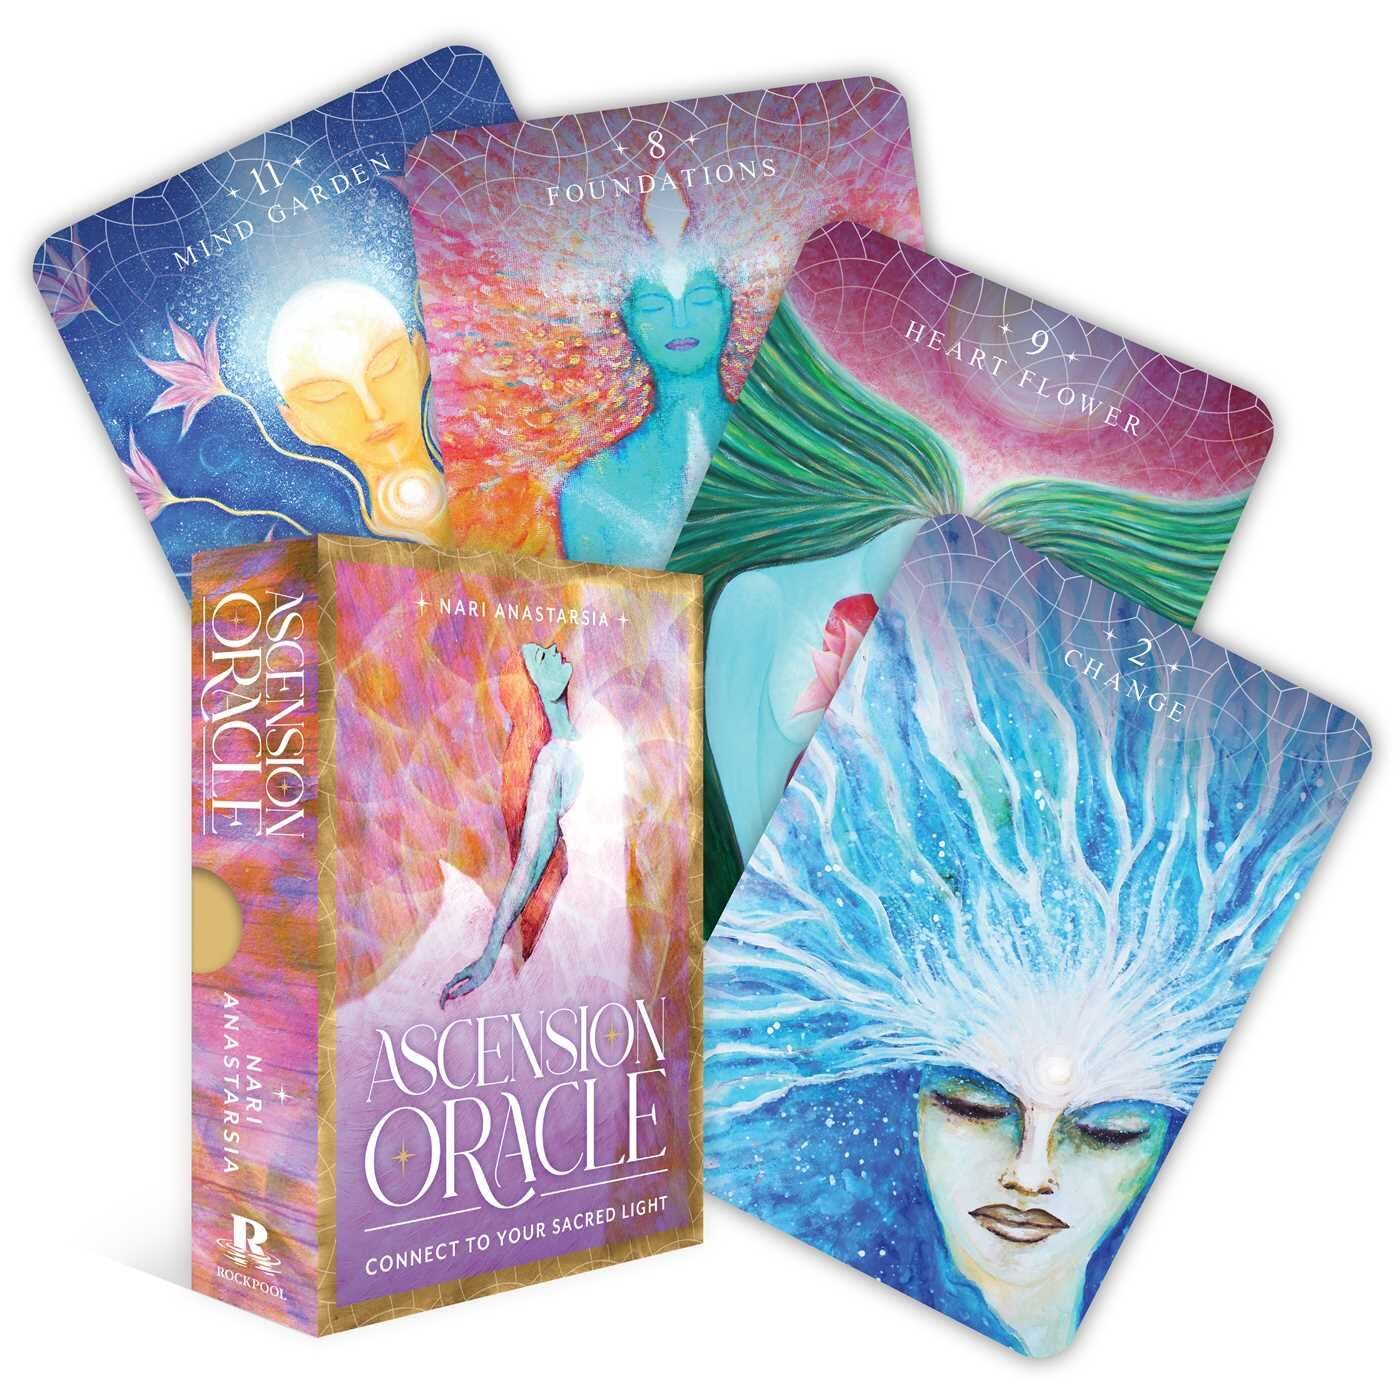 Ascension Oracle: Connect to your sacred light Crystal Wellness